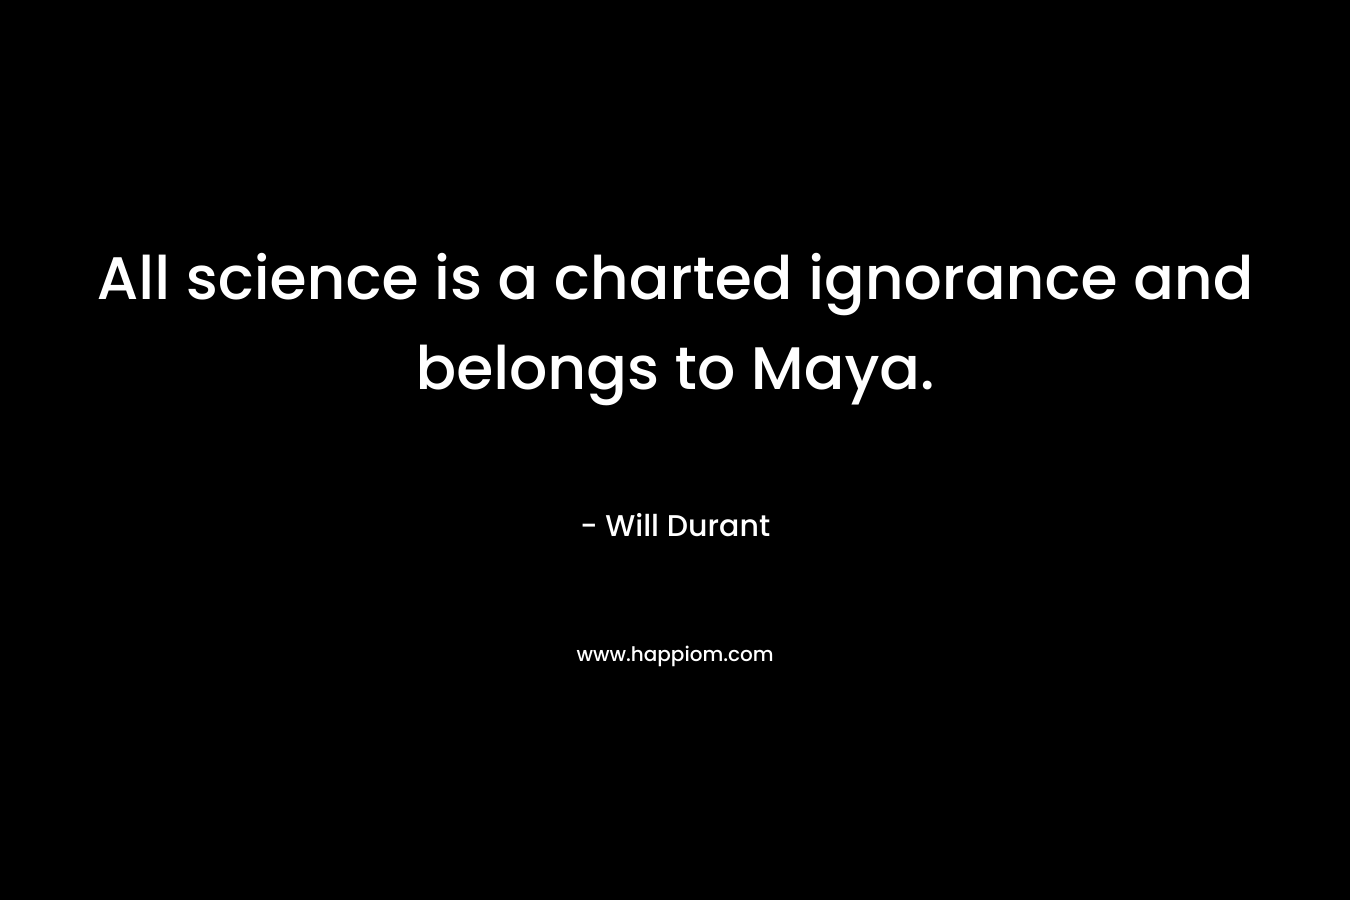 All science is a charted ignorance and belongs to Maya. – Will Durant